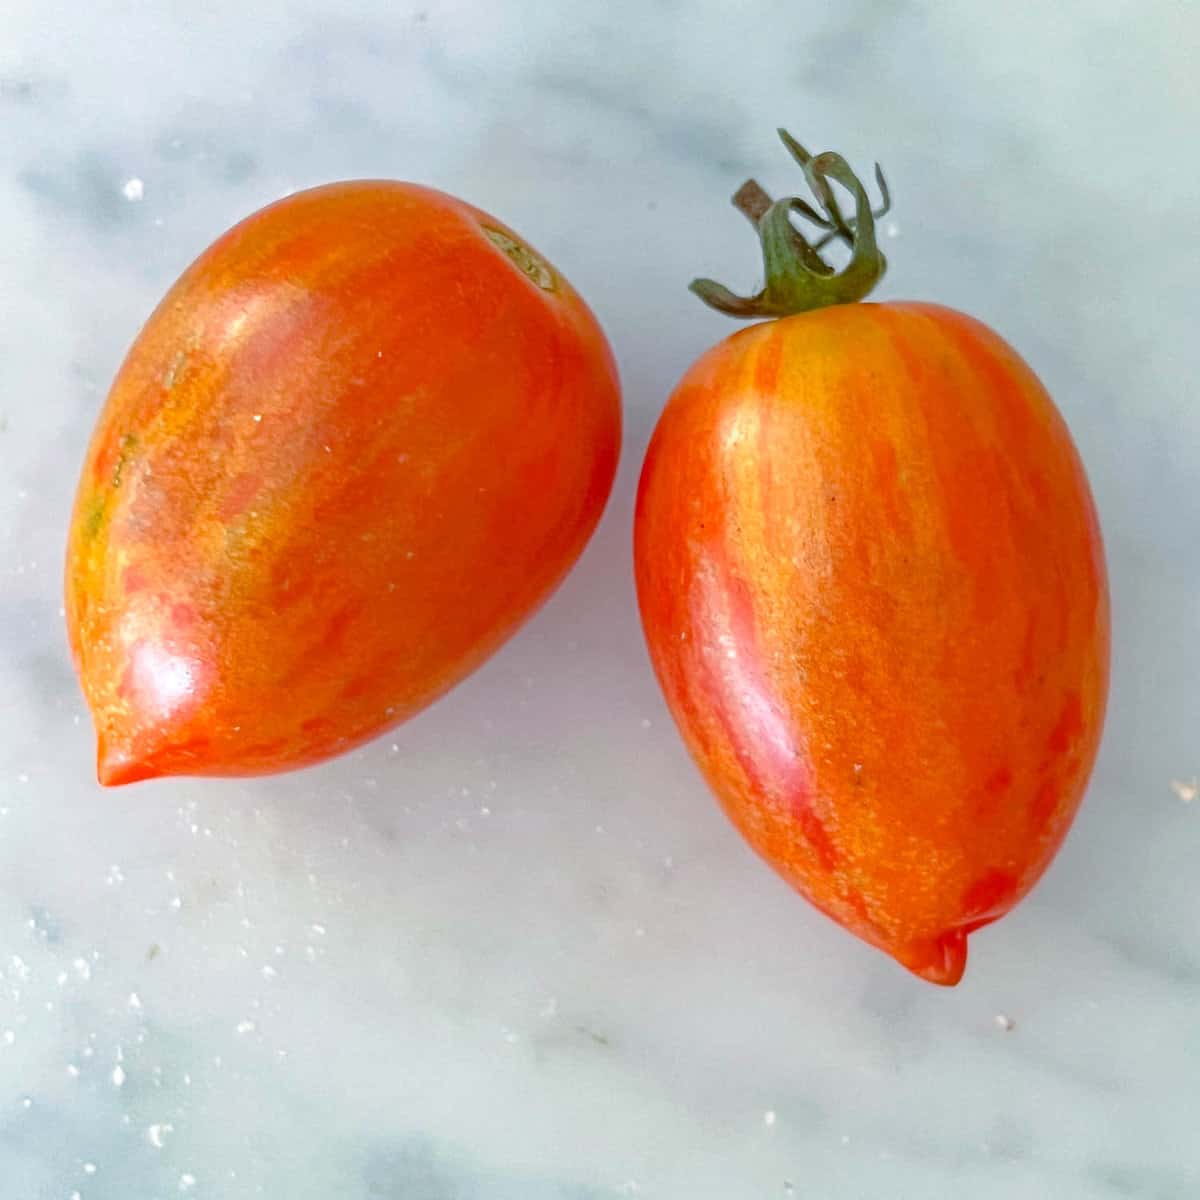 Two AAS winner, Red Torch tomatoes